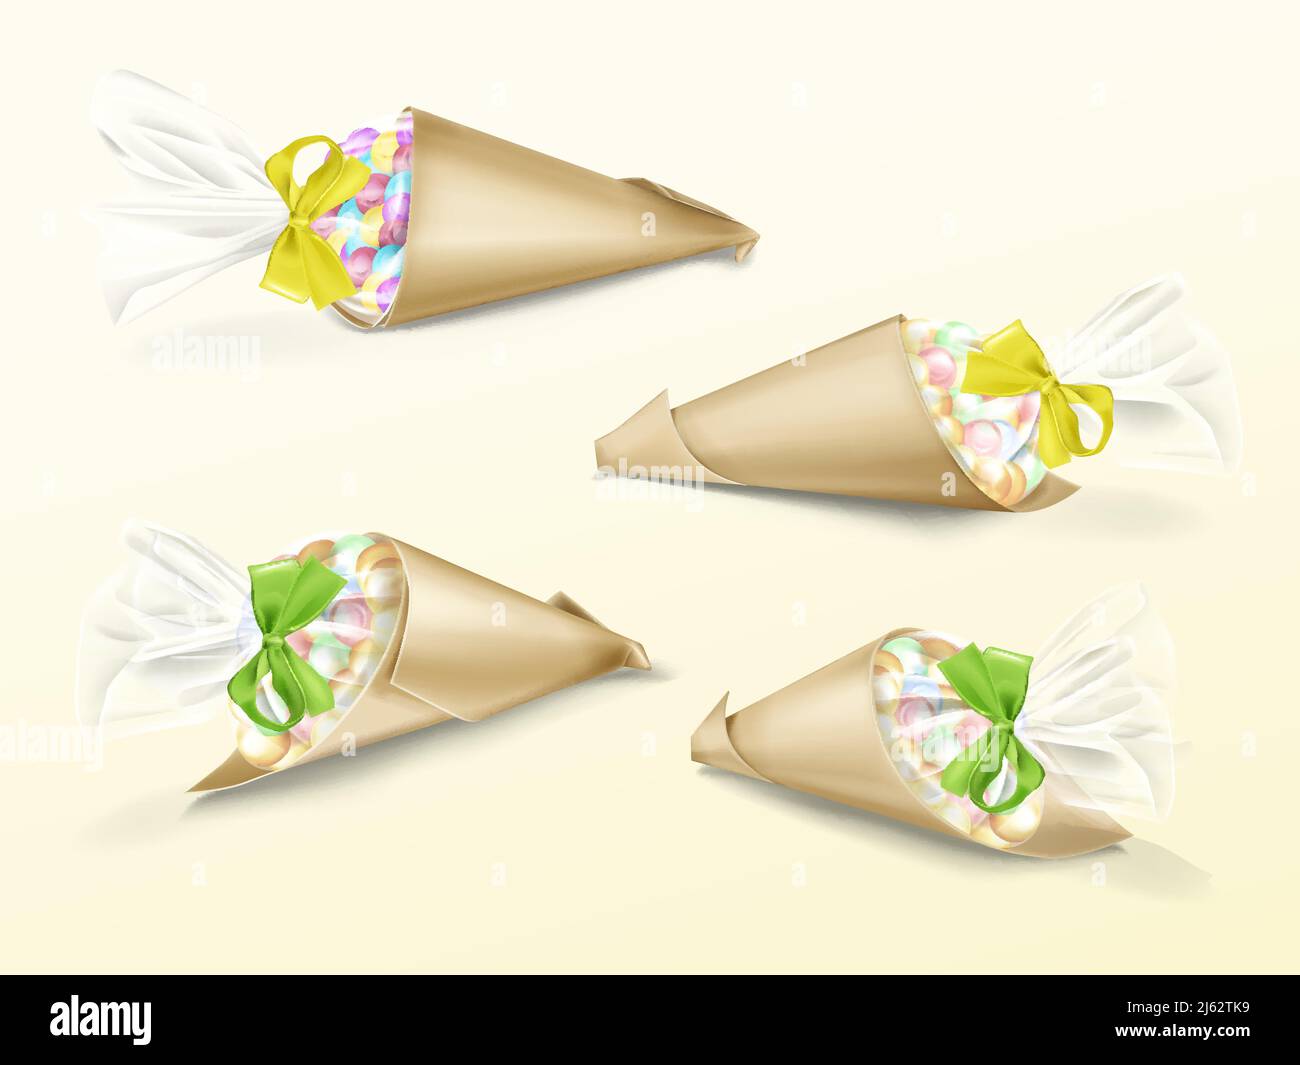 Vector realistic set of paper cone bags with colorful candies dragee and yellow and green silk ribbons. Hand made packaging for sweet snacks, gifts an Stock Vector